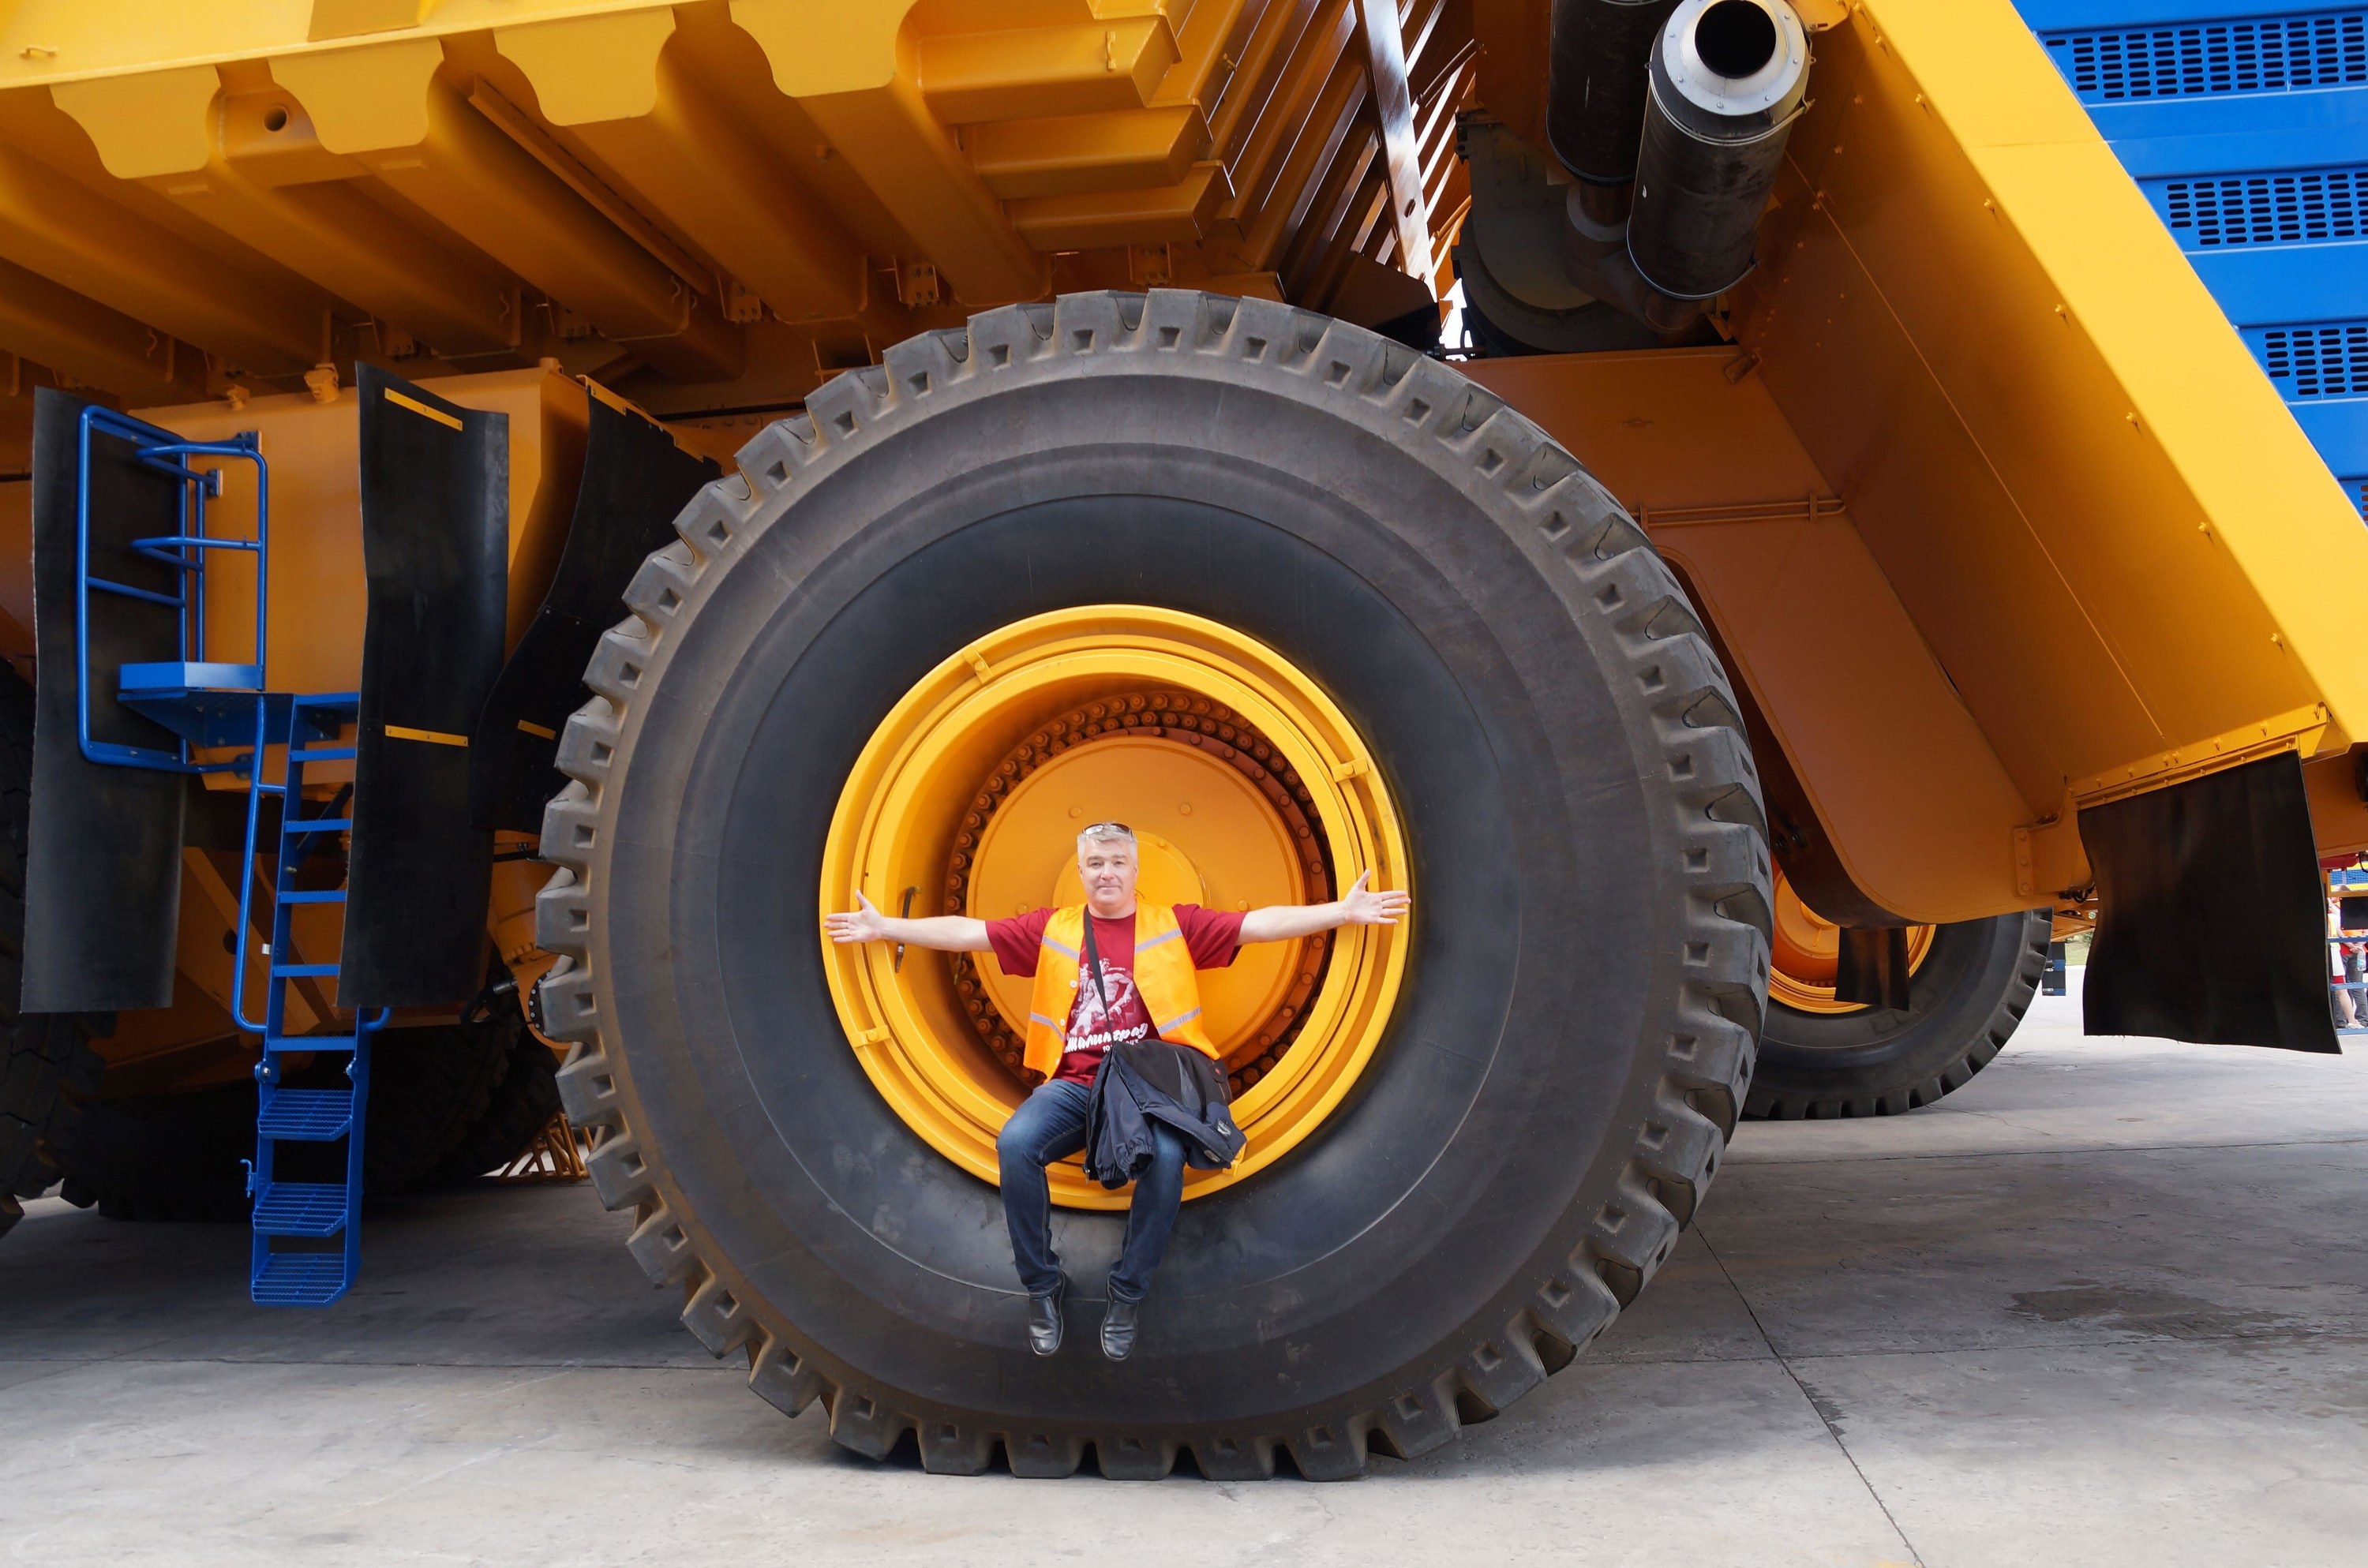 A person sitting on a truck wheel